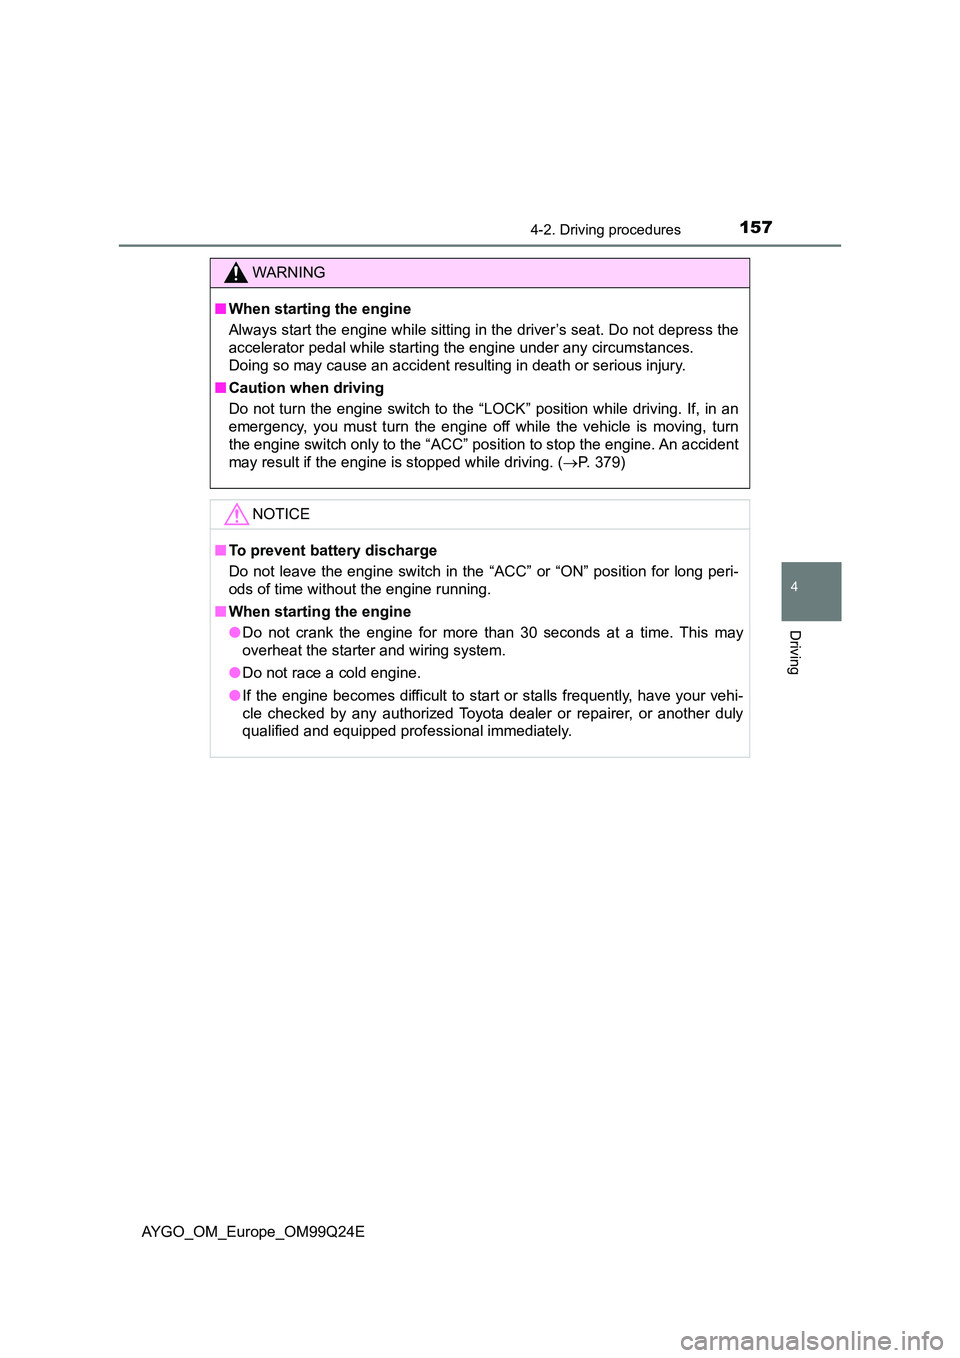 TOYOTA AYGO 2017  Owners Manual (in English) 1574-2. Driving procedures
4
Driving
AYGO_OM_Europe_OM99Q24E
WARNING
■When starting the engine 
Always start the engine while sitting in the driver’s seat. Do not depress the 
accelerator pedal wh